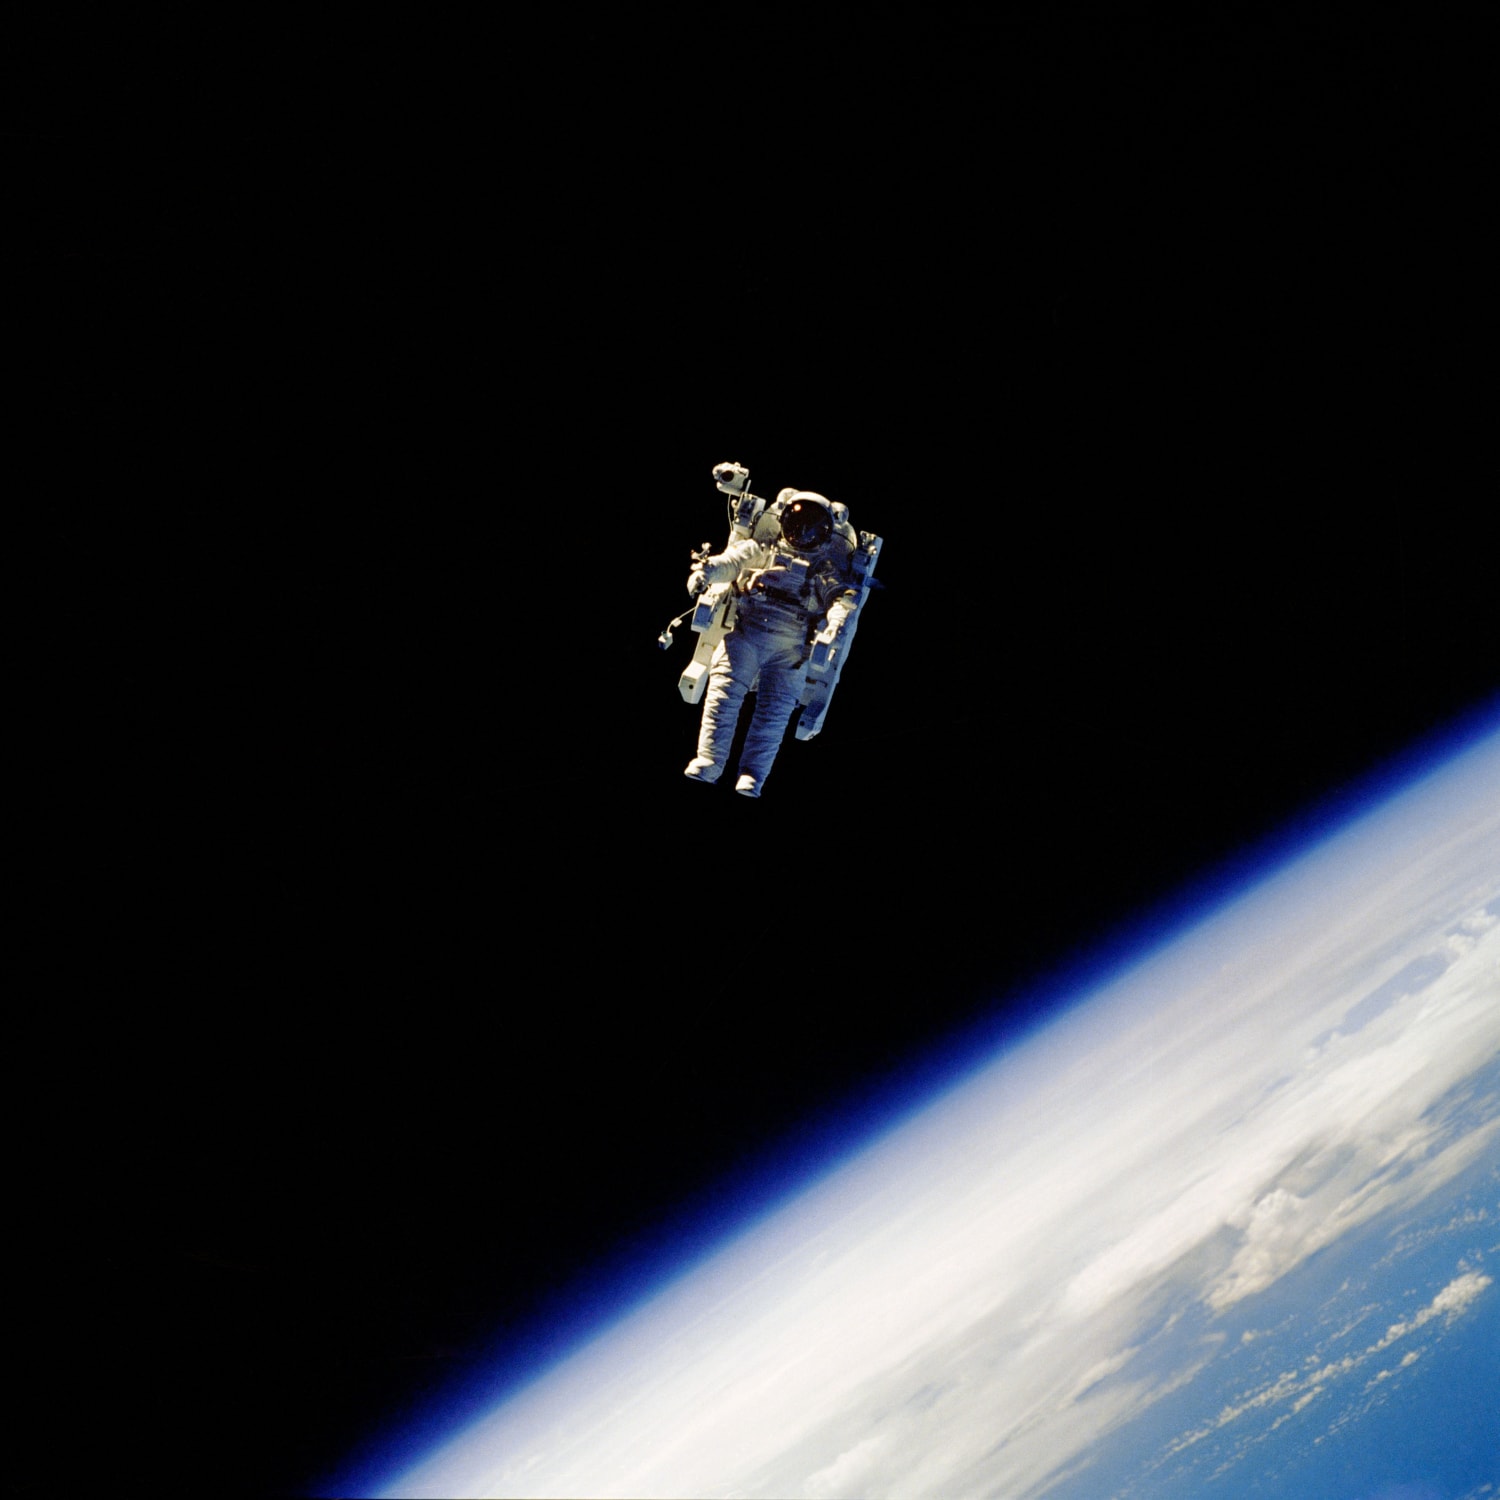 NASA Astronaut Robert L. Stewart "uses his hands to control his movement in space while using the nitrogen propelled Manned Maneuvering Unit (MMU)" as he orbits above Earth in February 1984. "He is floating without tethers attaching him to" NASA's Space Shuttle Challenger (STS-41B).